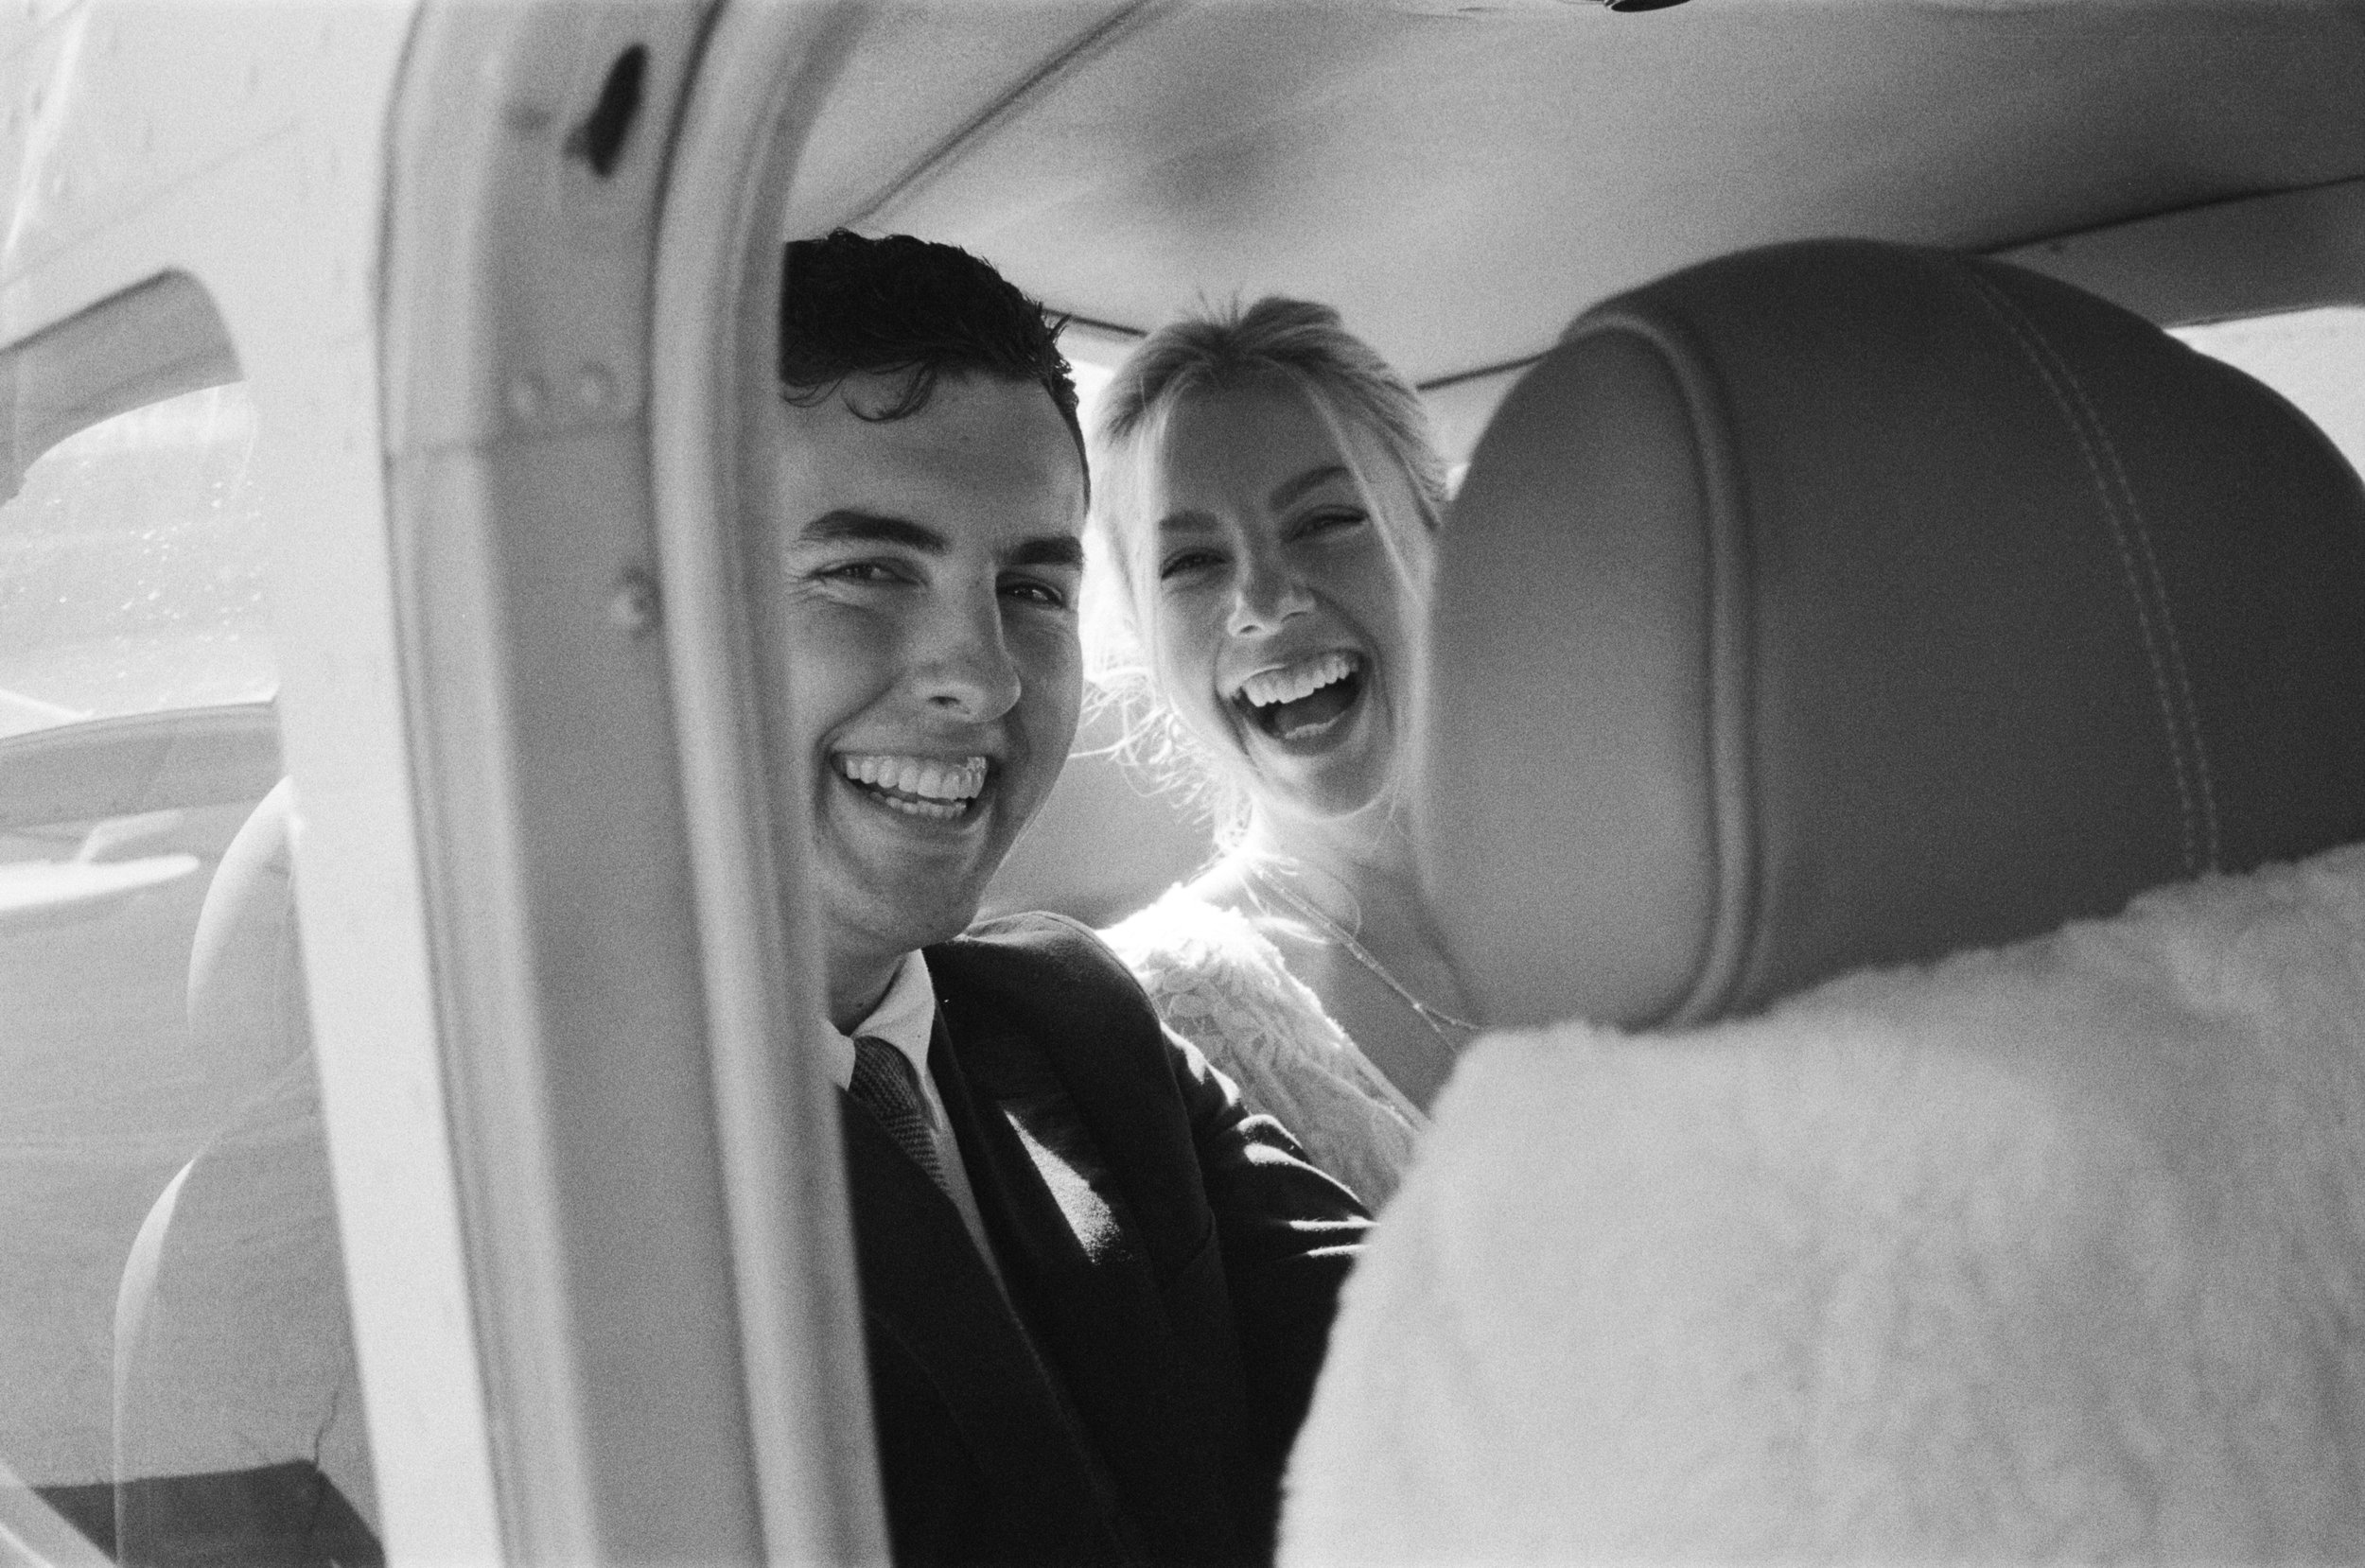 A private flight to share wedding vows